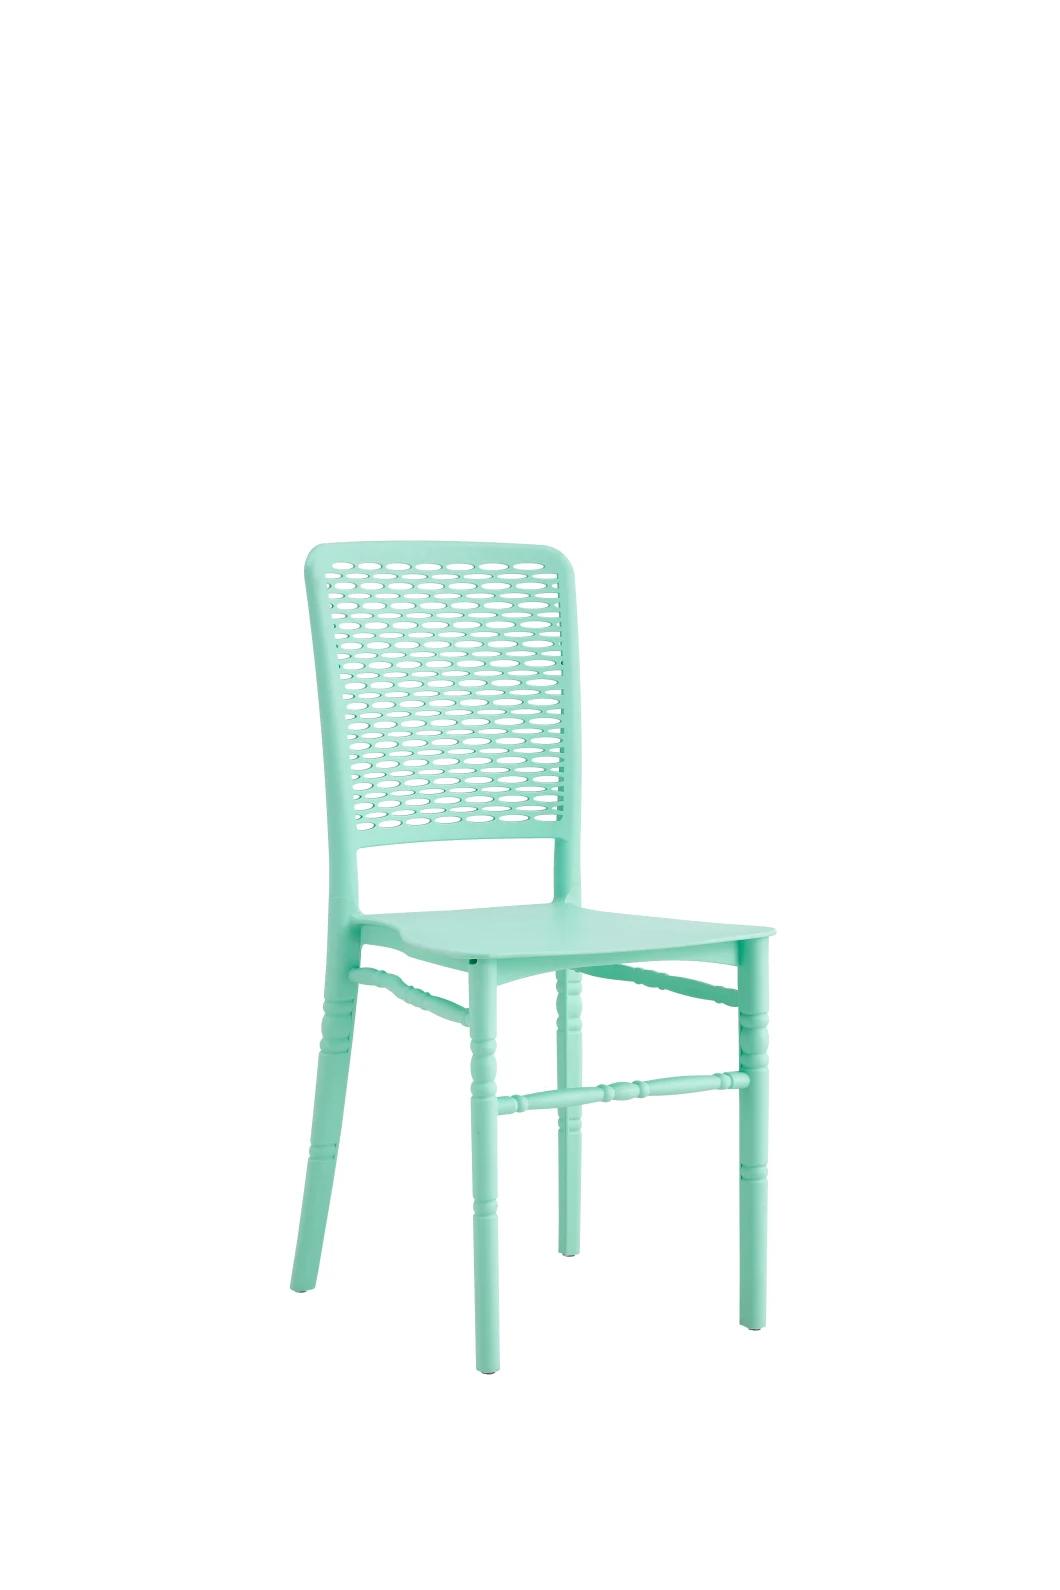 Polypropylene Water Proof Outdoor Chair Factory Hot Sale Outdoor PP Wedding Plastic Chair for Kids From China